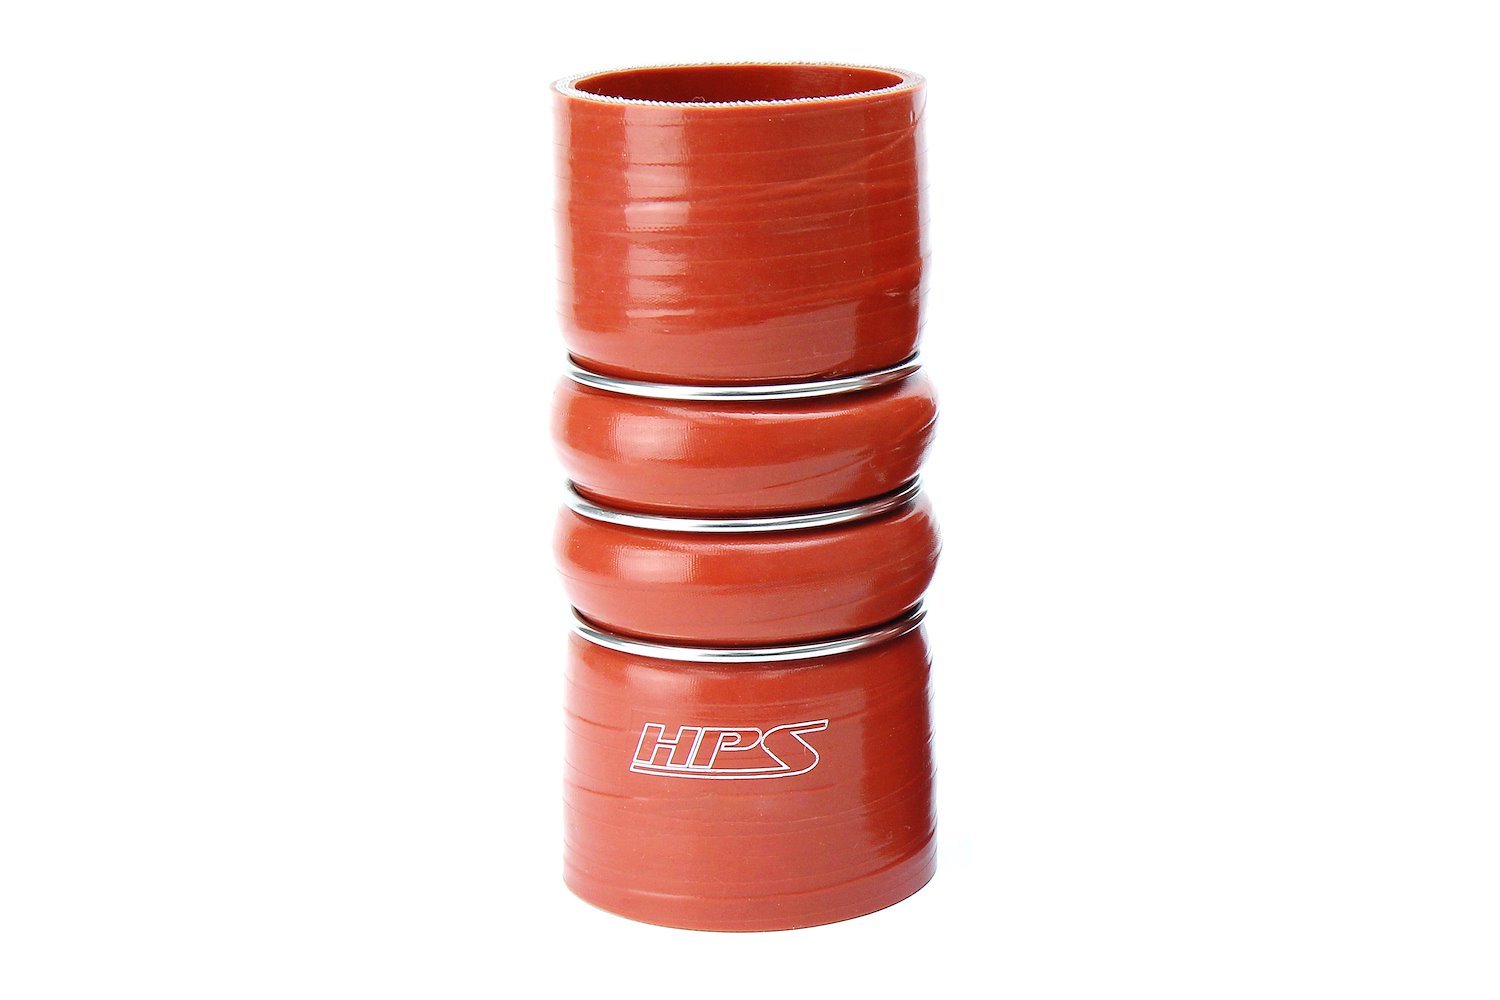 CAC-275-HOT Silicone CAC Hose, Silicone CAC Hump Hose Hot, High-Temp 4-Ply Aramid Reinforced, 2-3/4 in. ID, 6 in. Long